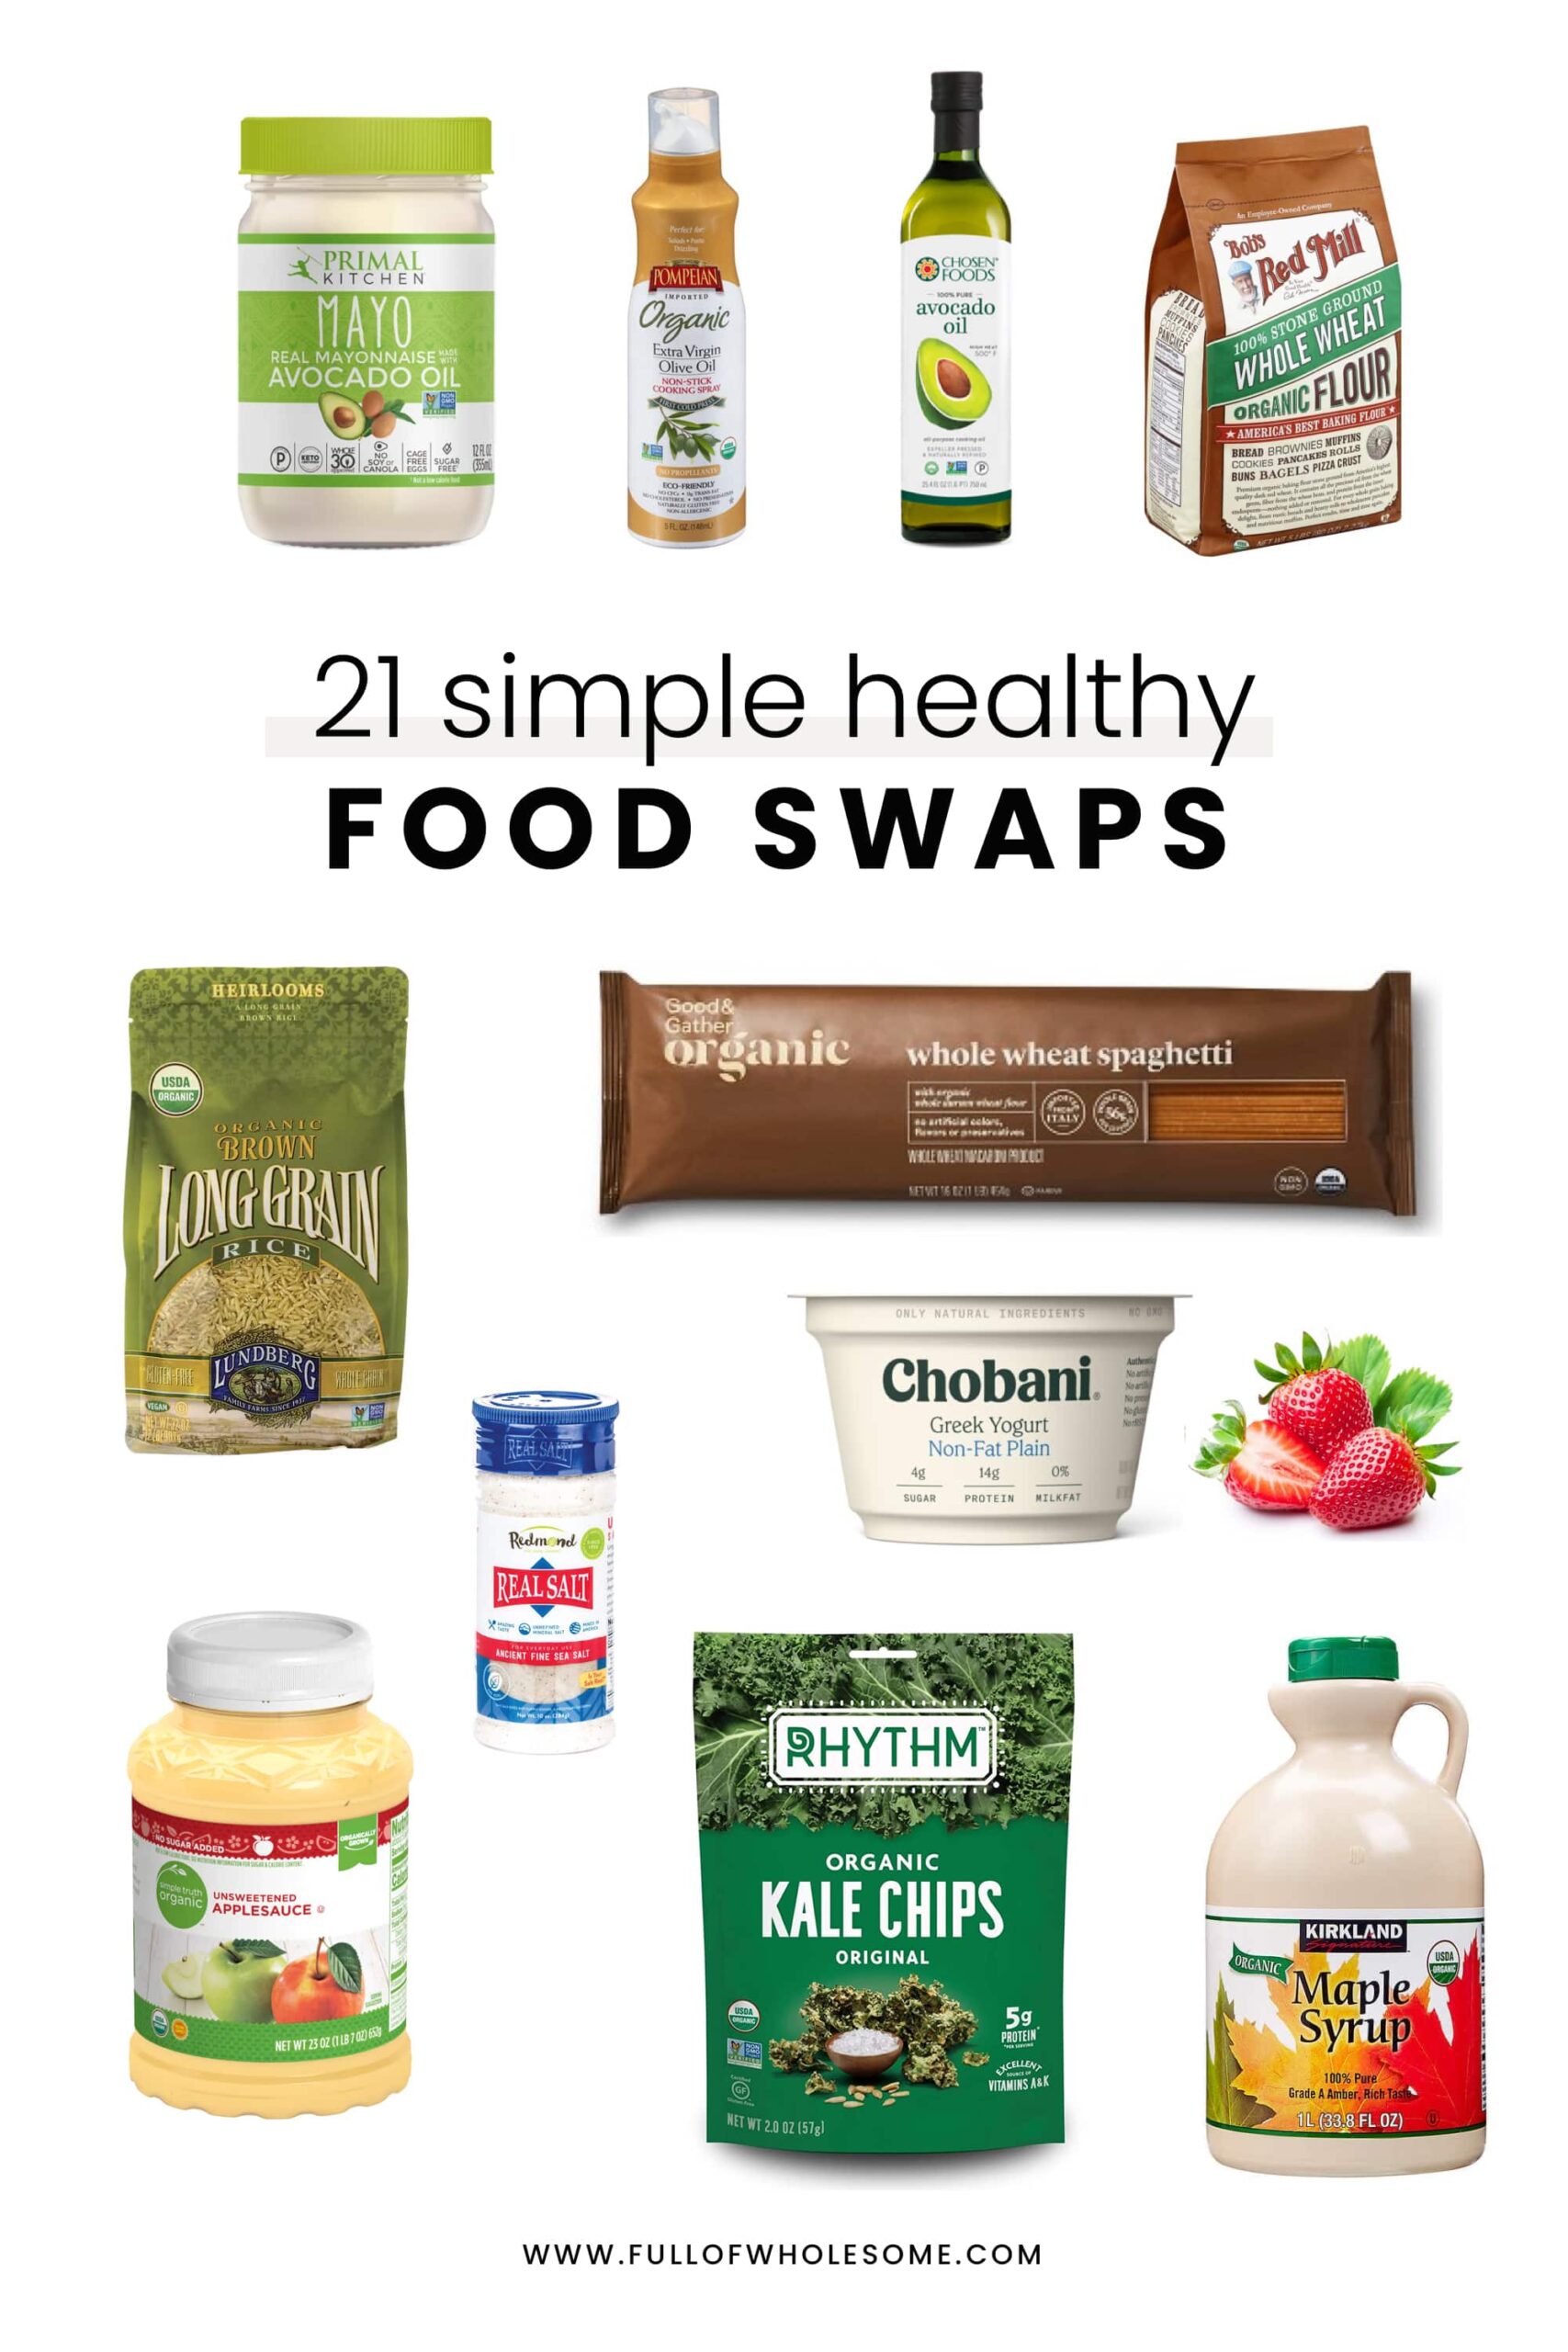 https://fullofwholesome.com/wp-content/uploads/2021/05/21-healthy-Food-Swaps-min-scaled.jpg